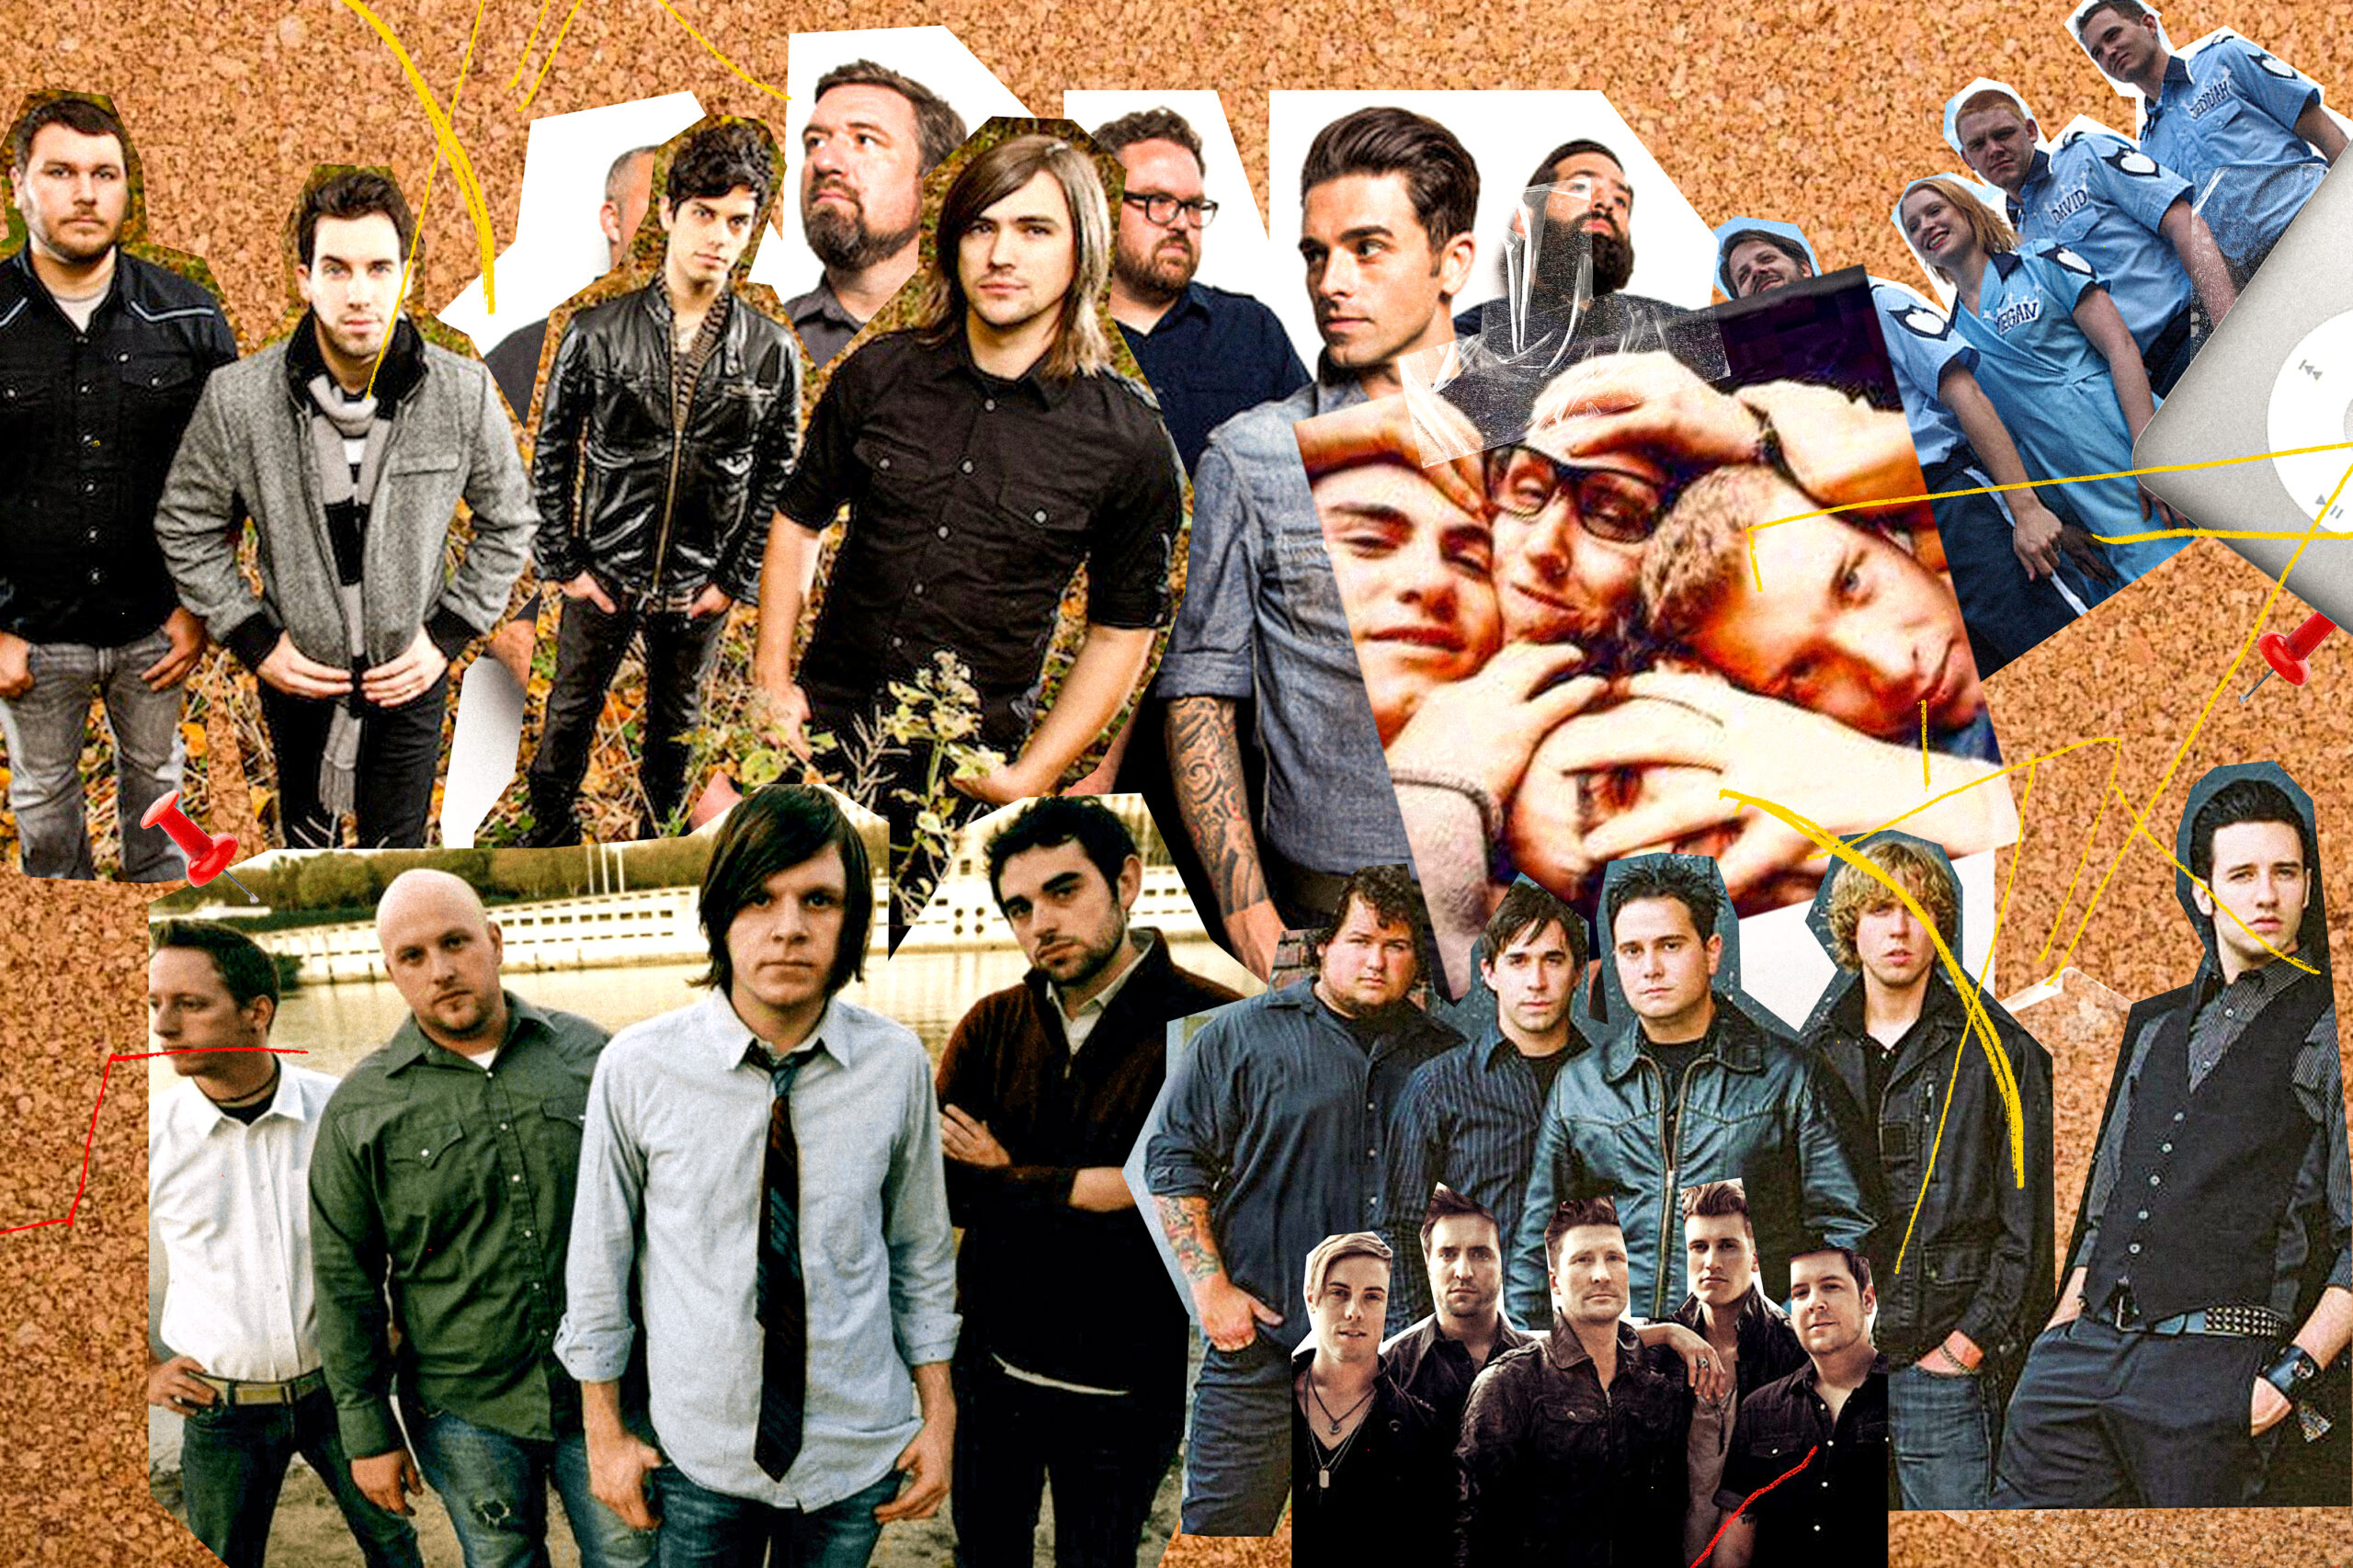 The Definitive Ranking of Early 2000s Christian Indie Rock Bands